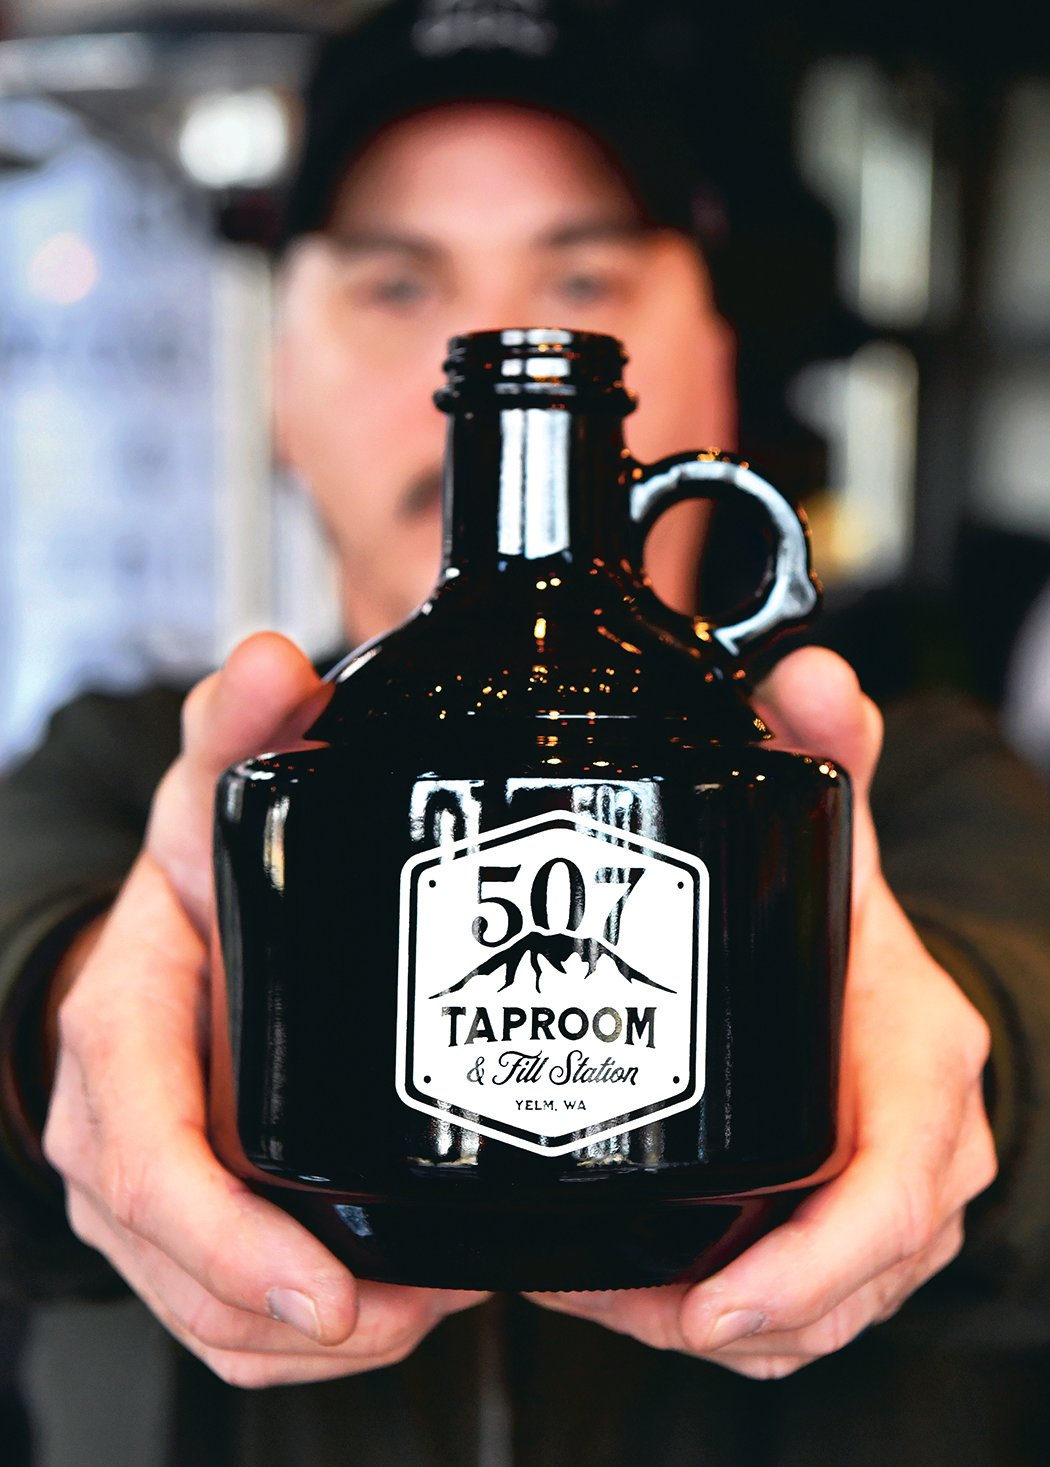 Bill DeVore, who owns 507 Taproom and Filling Station in Yelm, displays a 32-ounce "growler" to-go bottle at the business in this file photo.